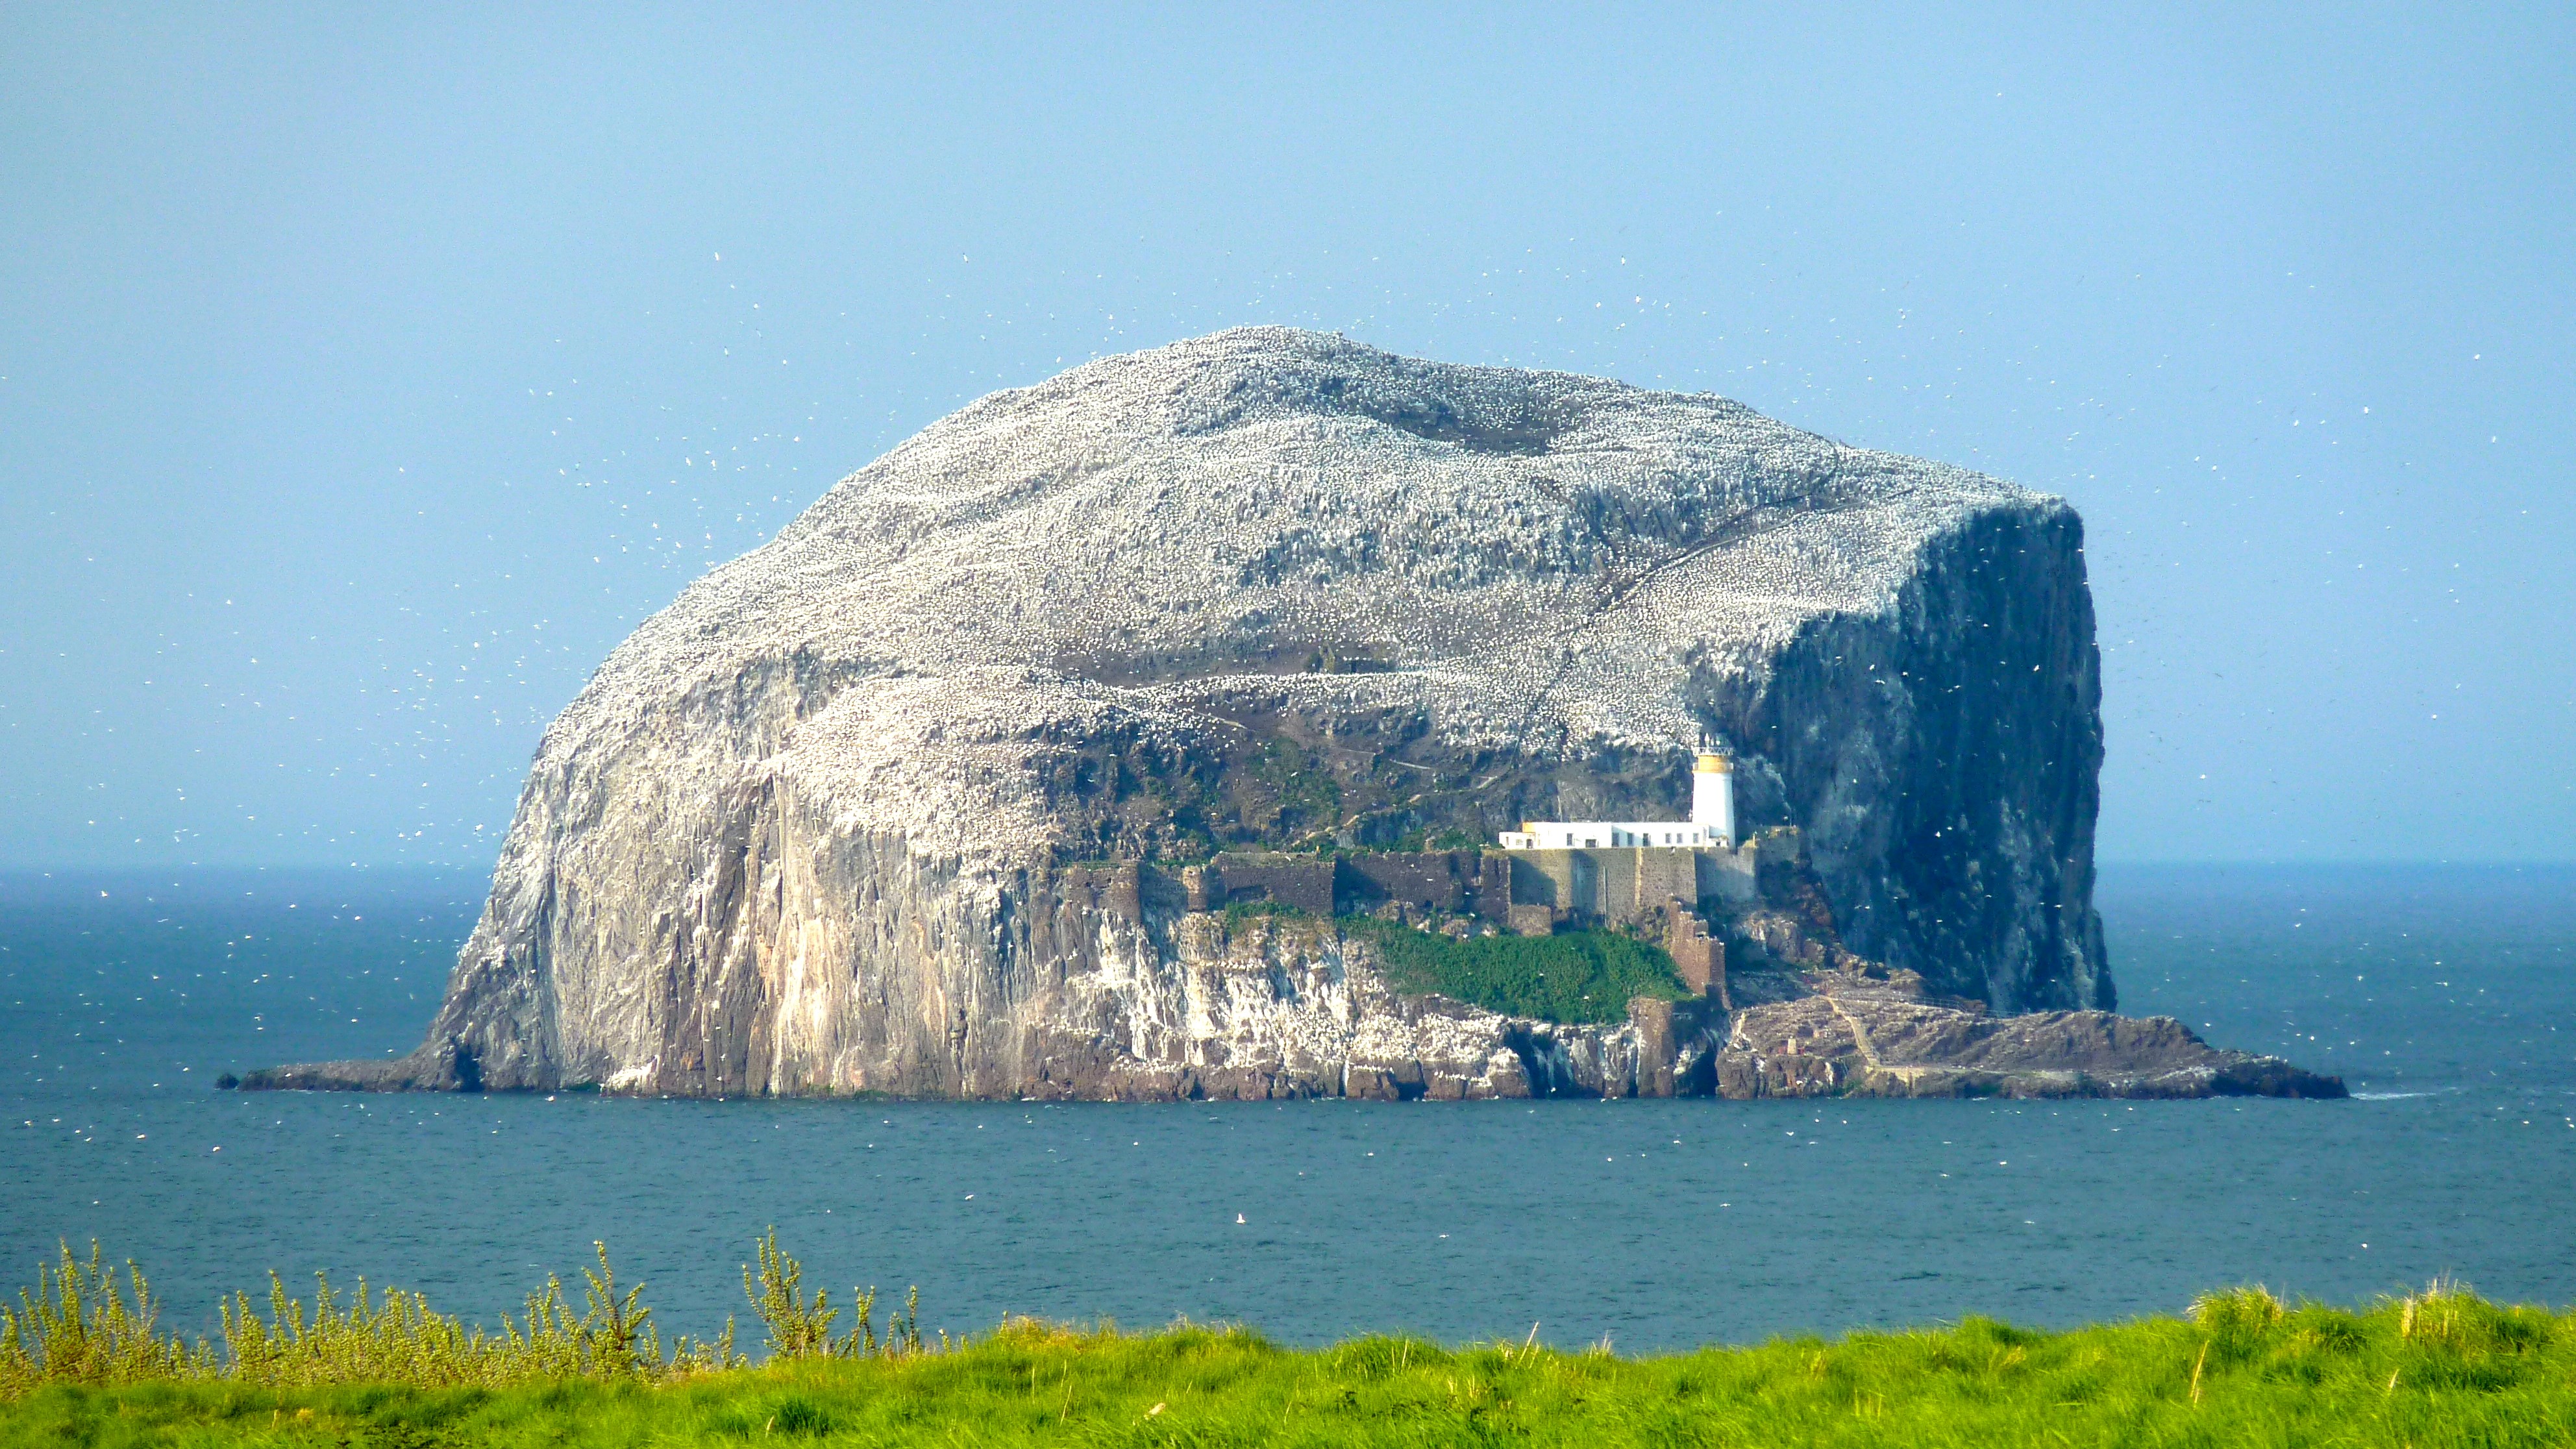 A massive dome of rock rises out of a calm sea. A white lighthouse is on the rock, as are thousands of nesting birds.